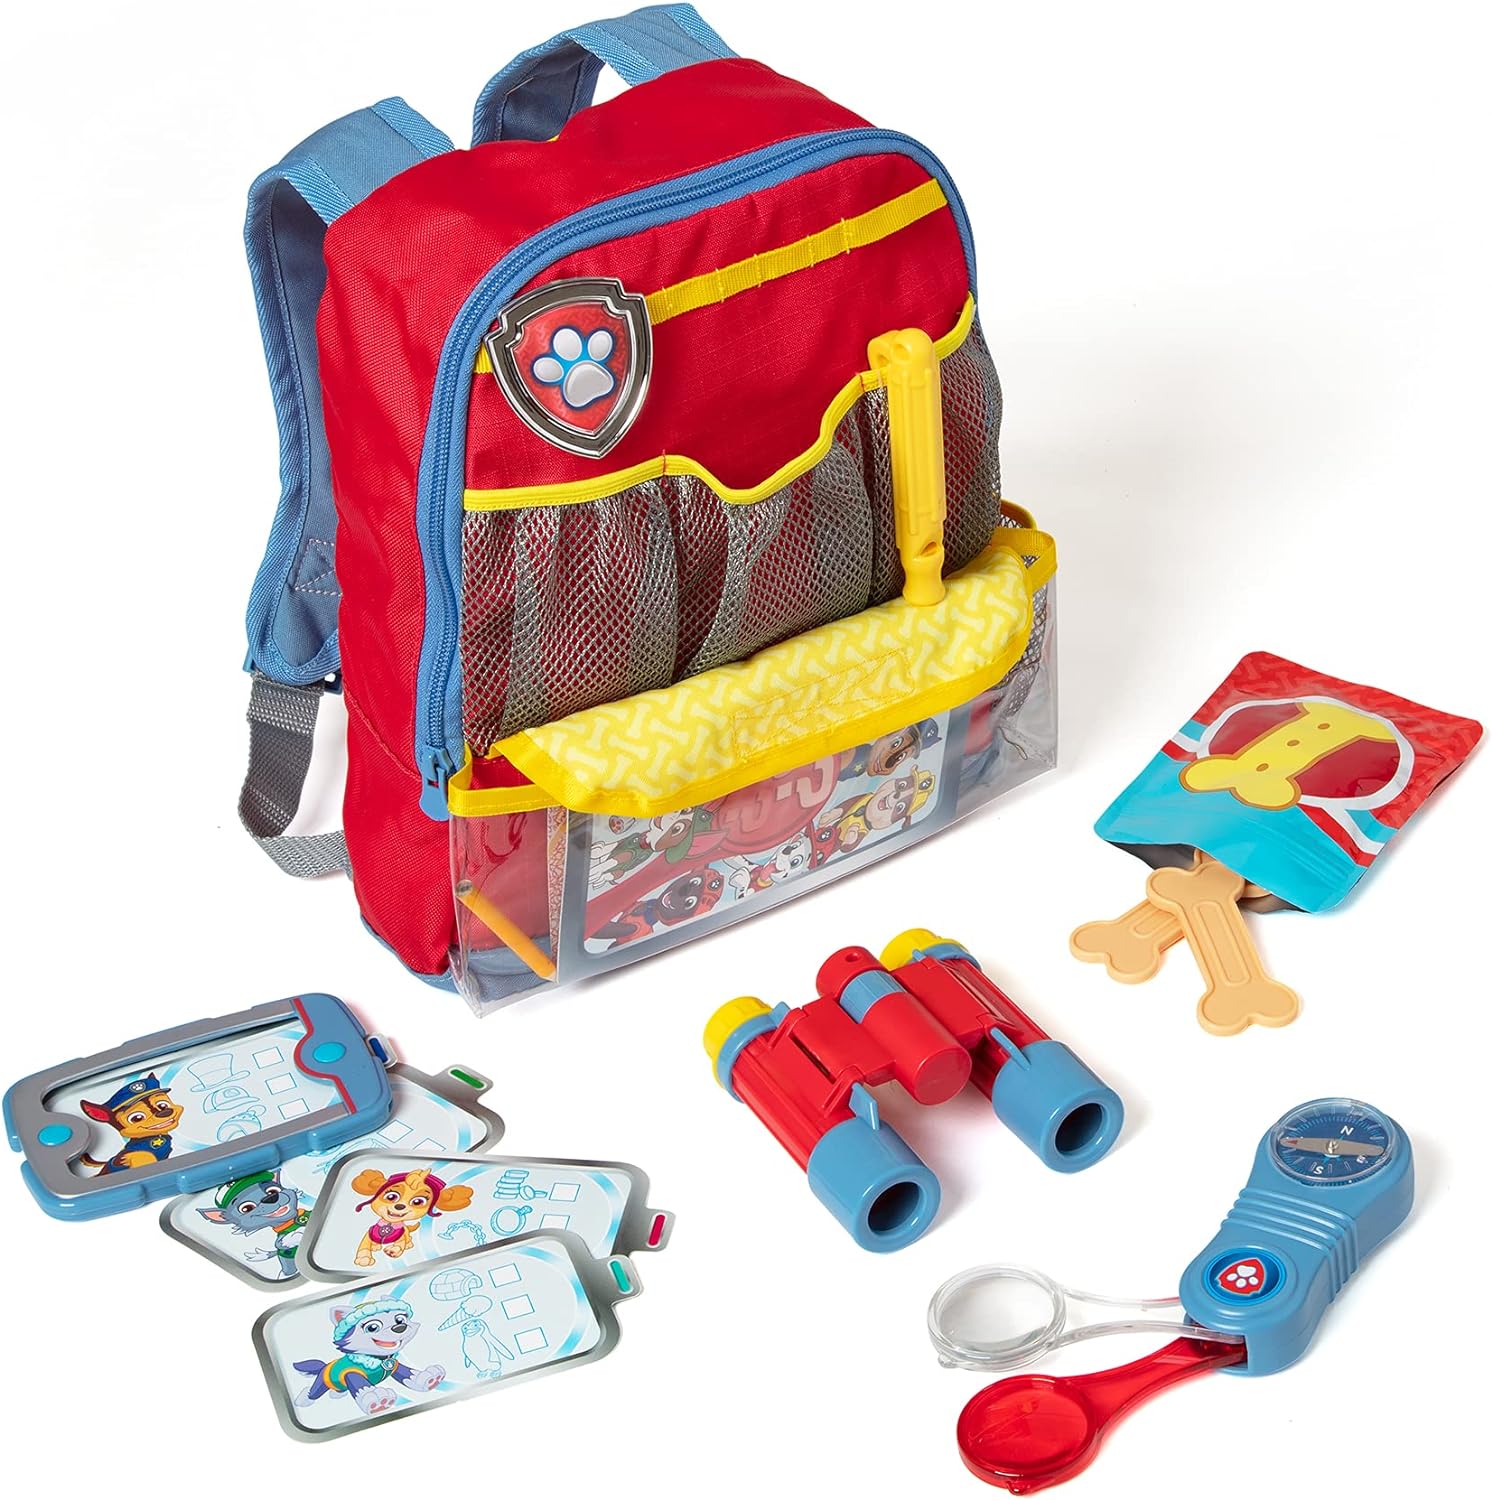 Melissa & Doug PAW Patrol Pup Backpack Role Play Set (15 Pieces) - PAW Patrol Adventure Pack, Toys, Pretend Play Outdoor Gear